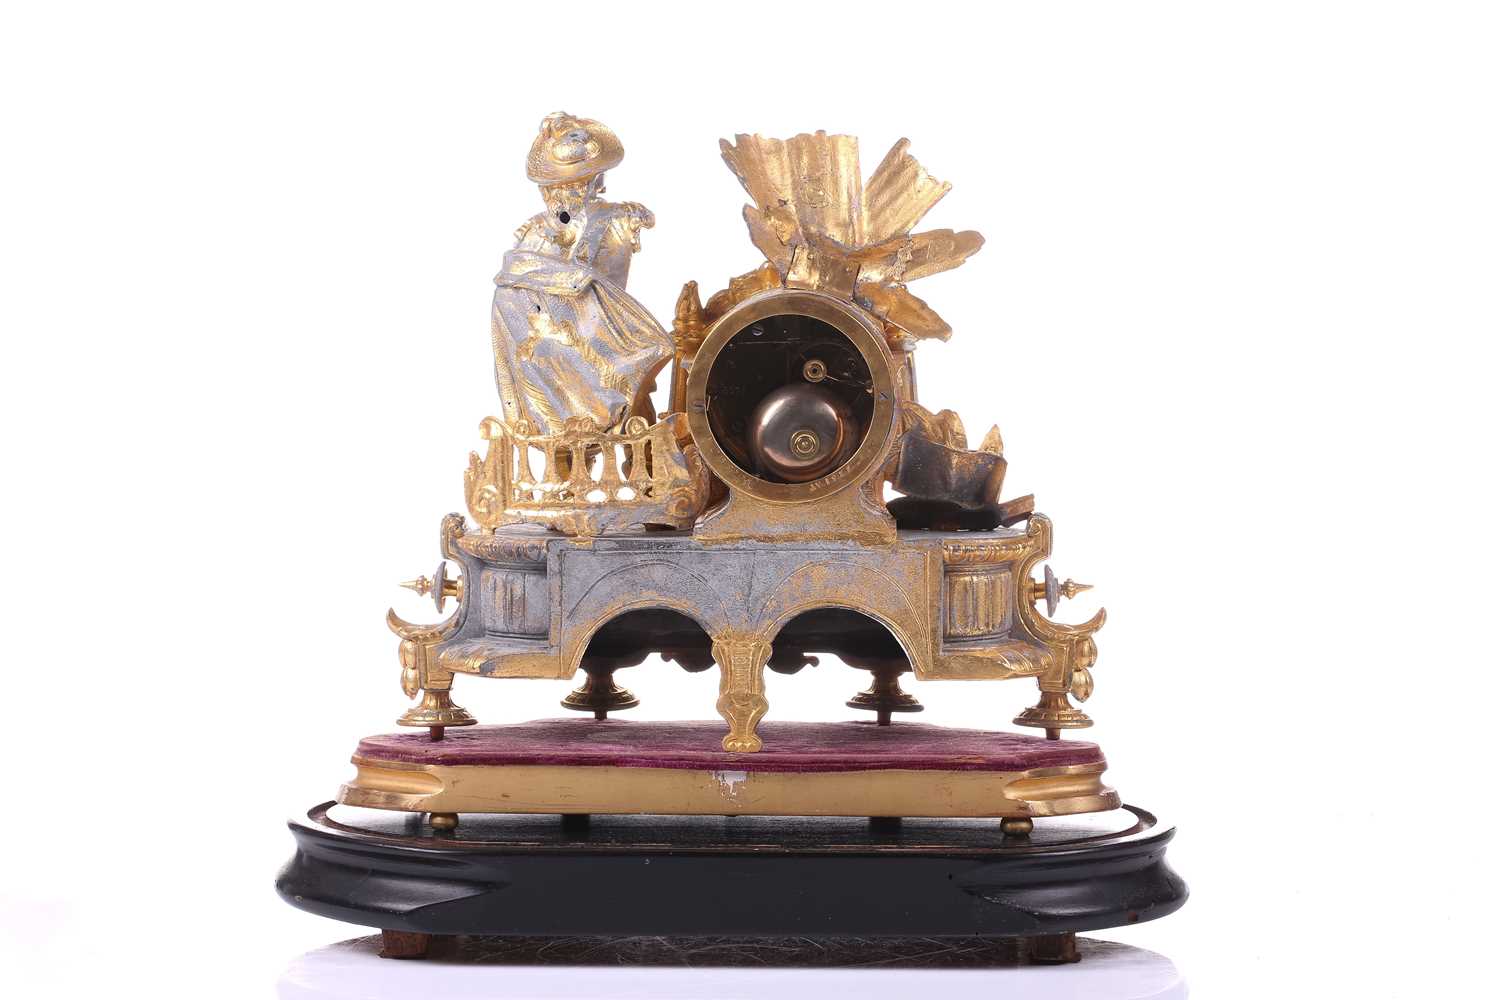 A late 19th century French parcel gilt spelter clock, depicting a nobleman standing beside a drum - Image 4 of 14